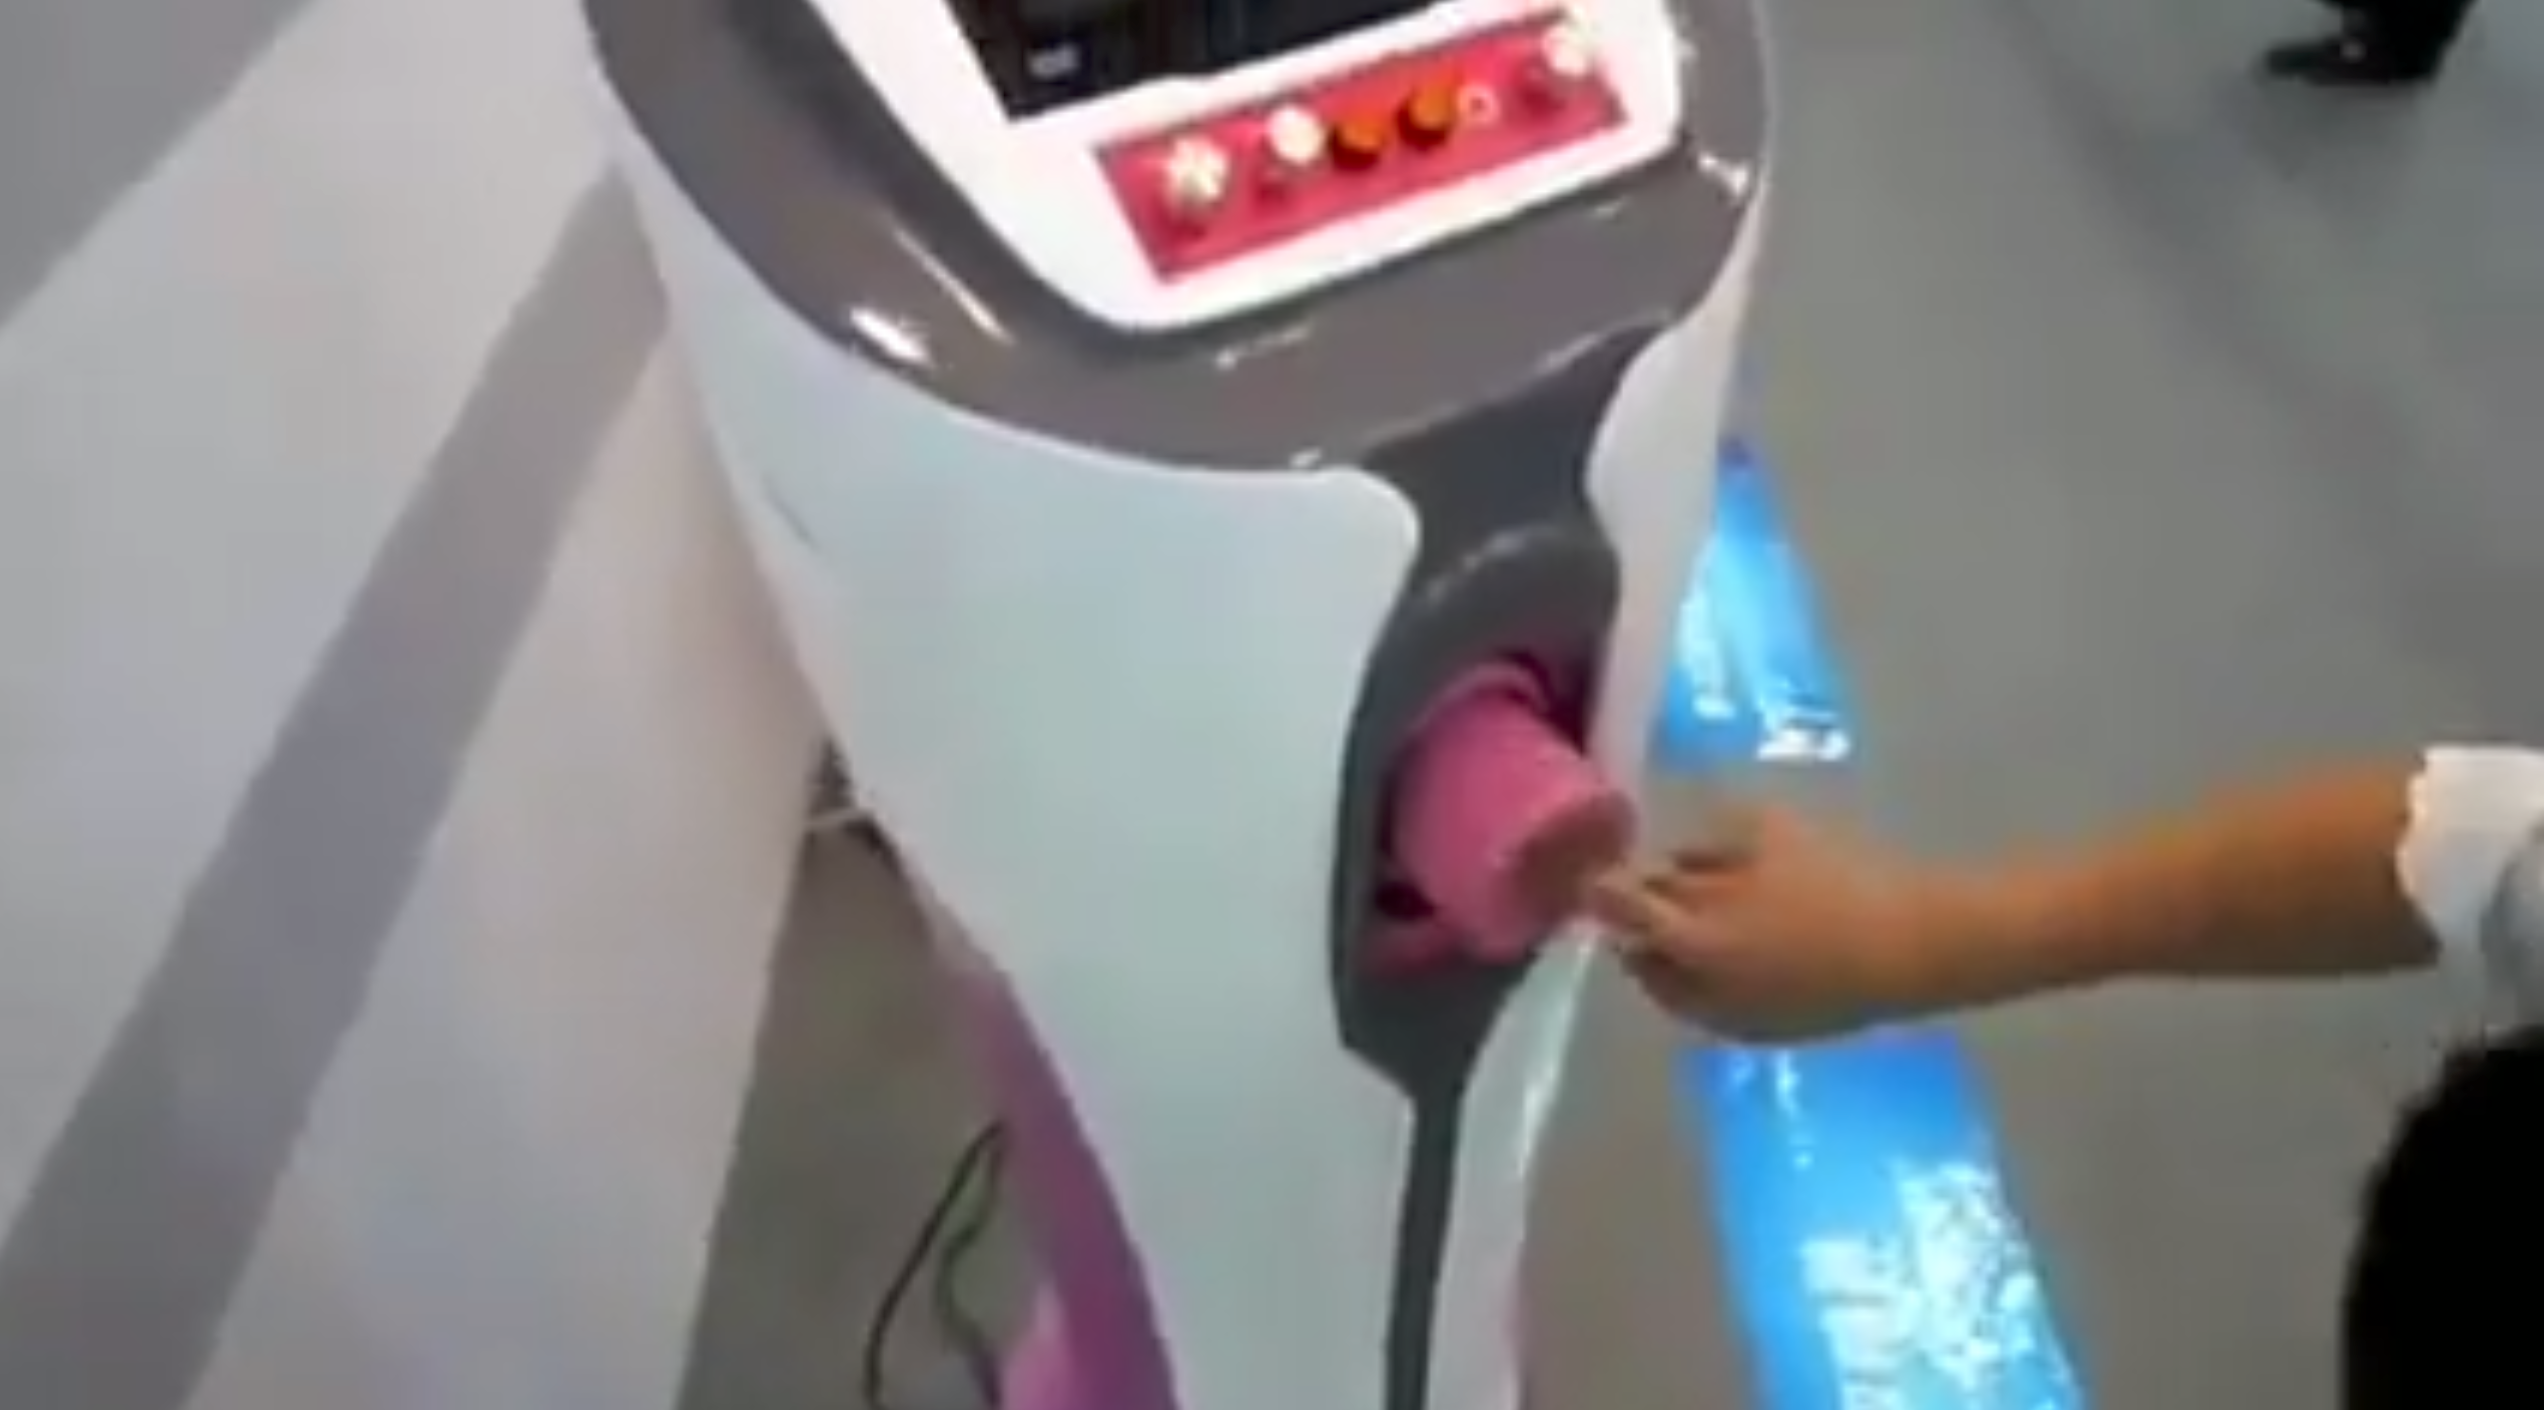 Everything You Need to Know About the Chinese Blowjob Machine Viral Video pic